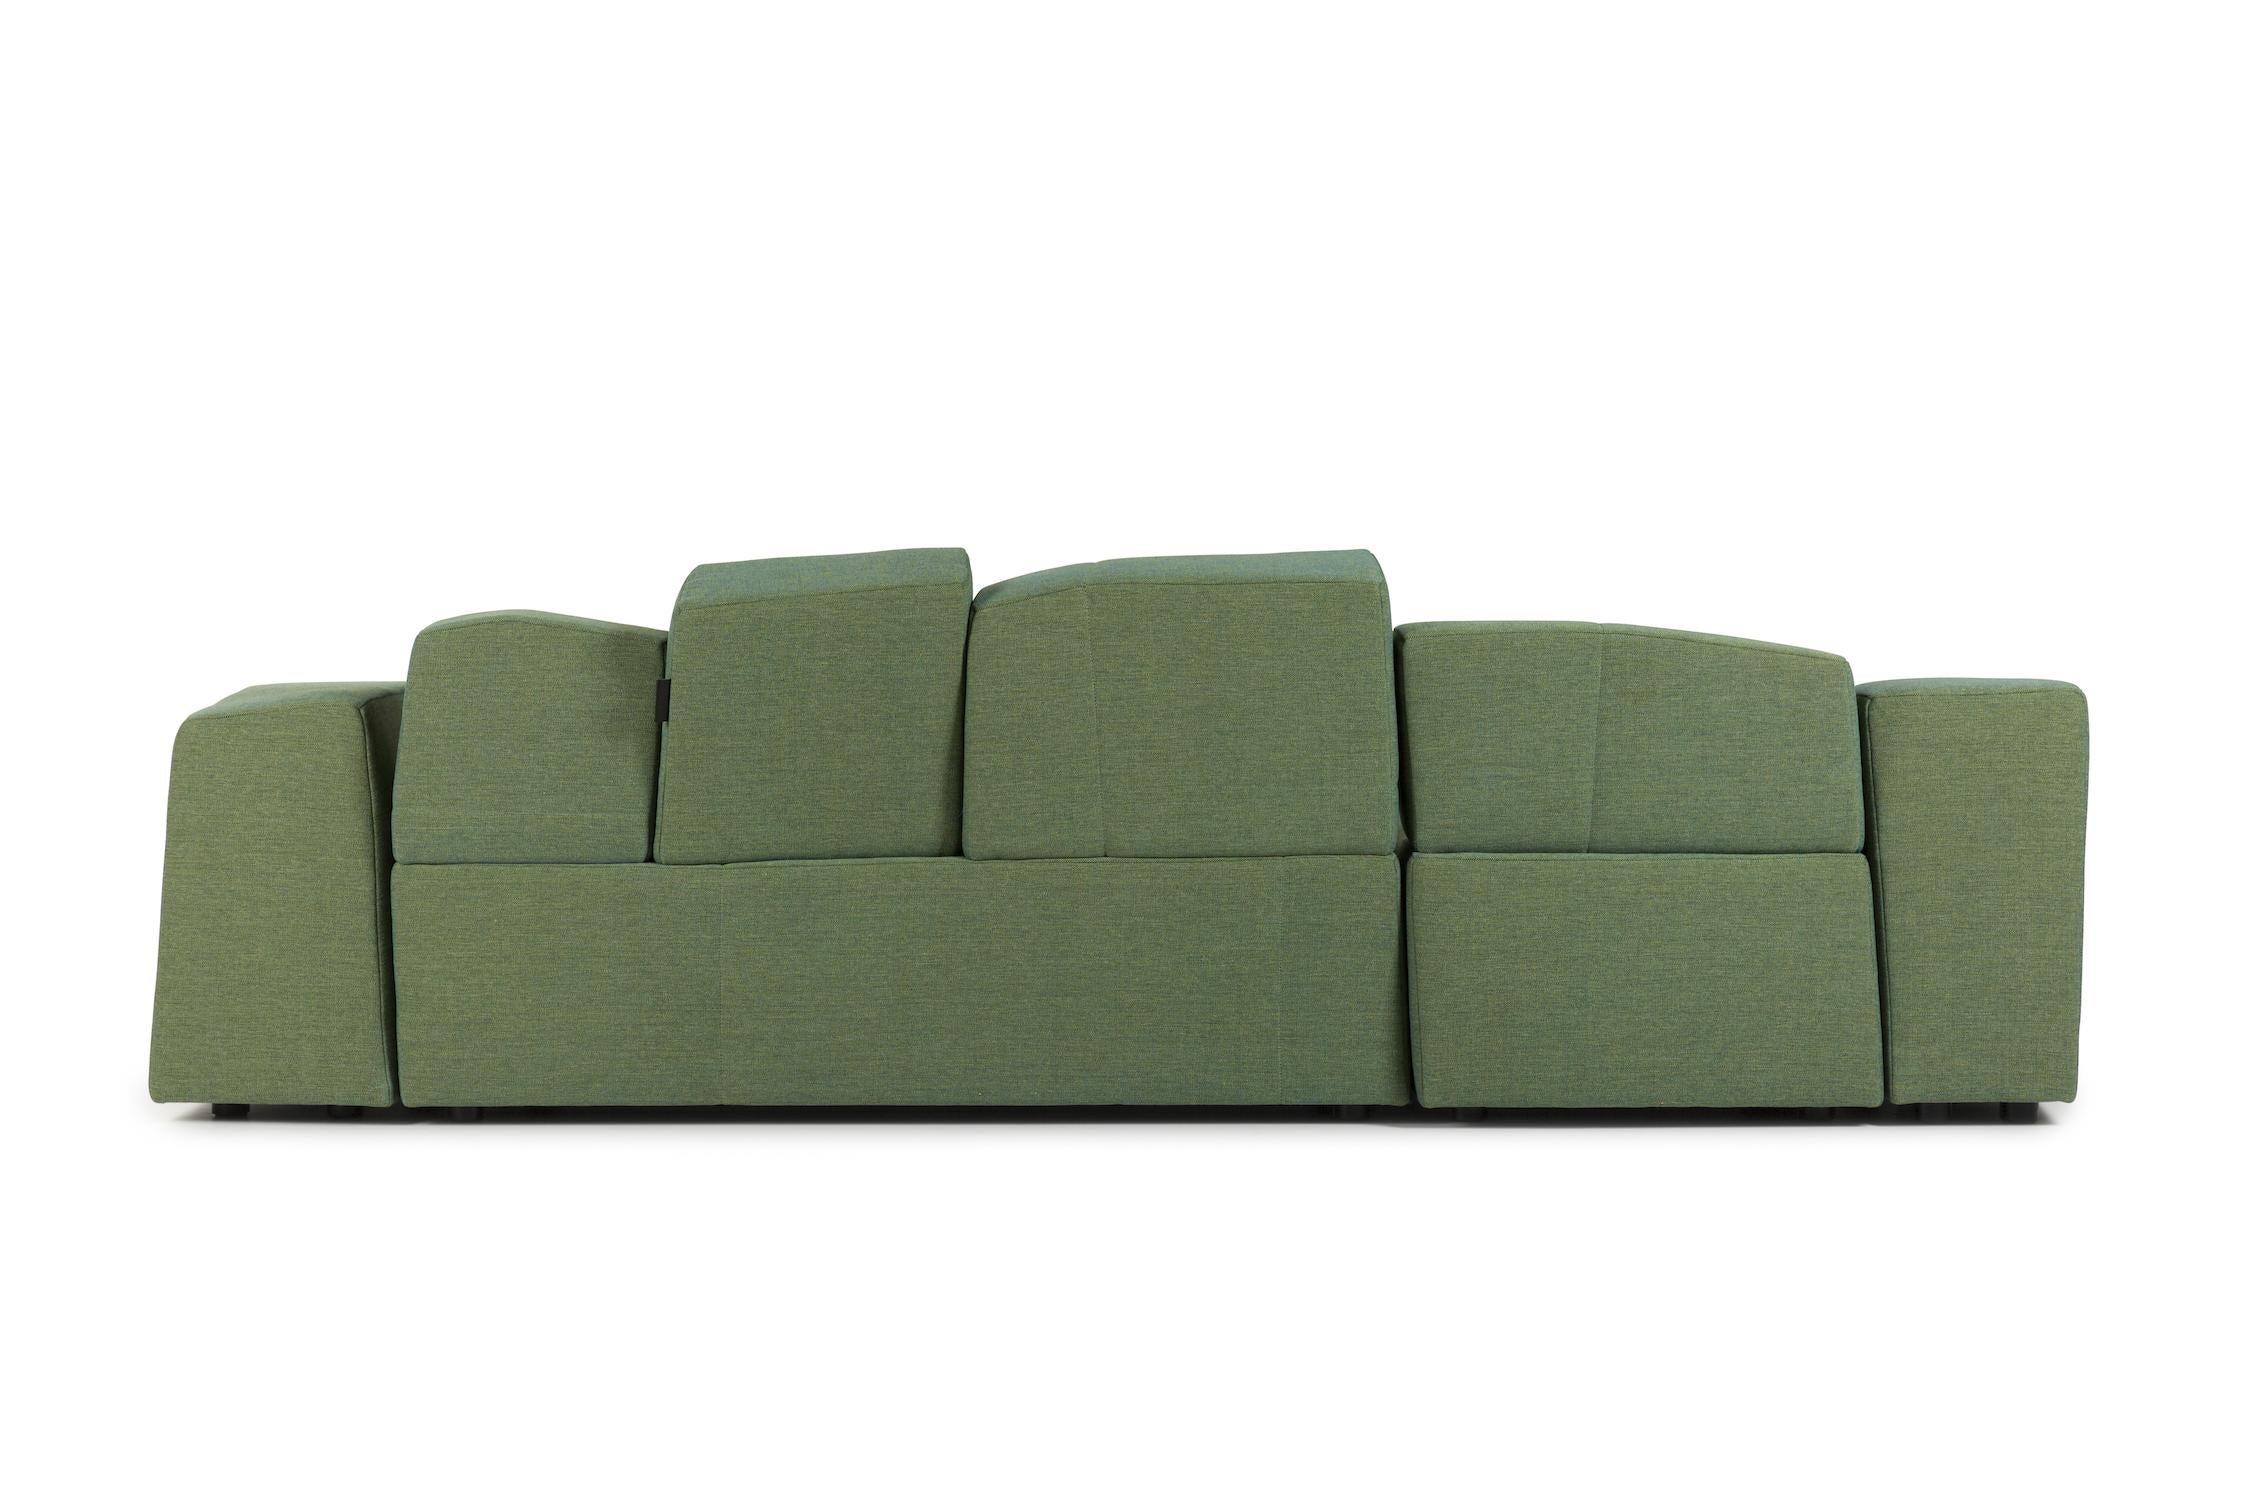 Dutch Something Like This Modular Sofa by Maarten Baas in Fabric or Leather For Sale